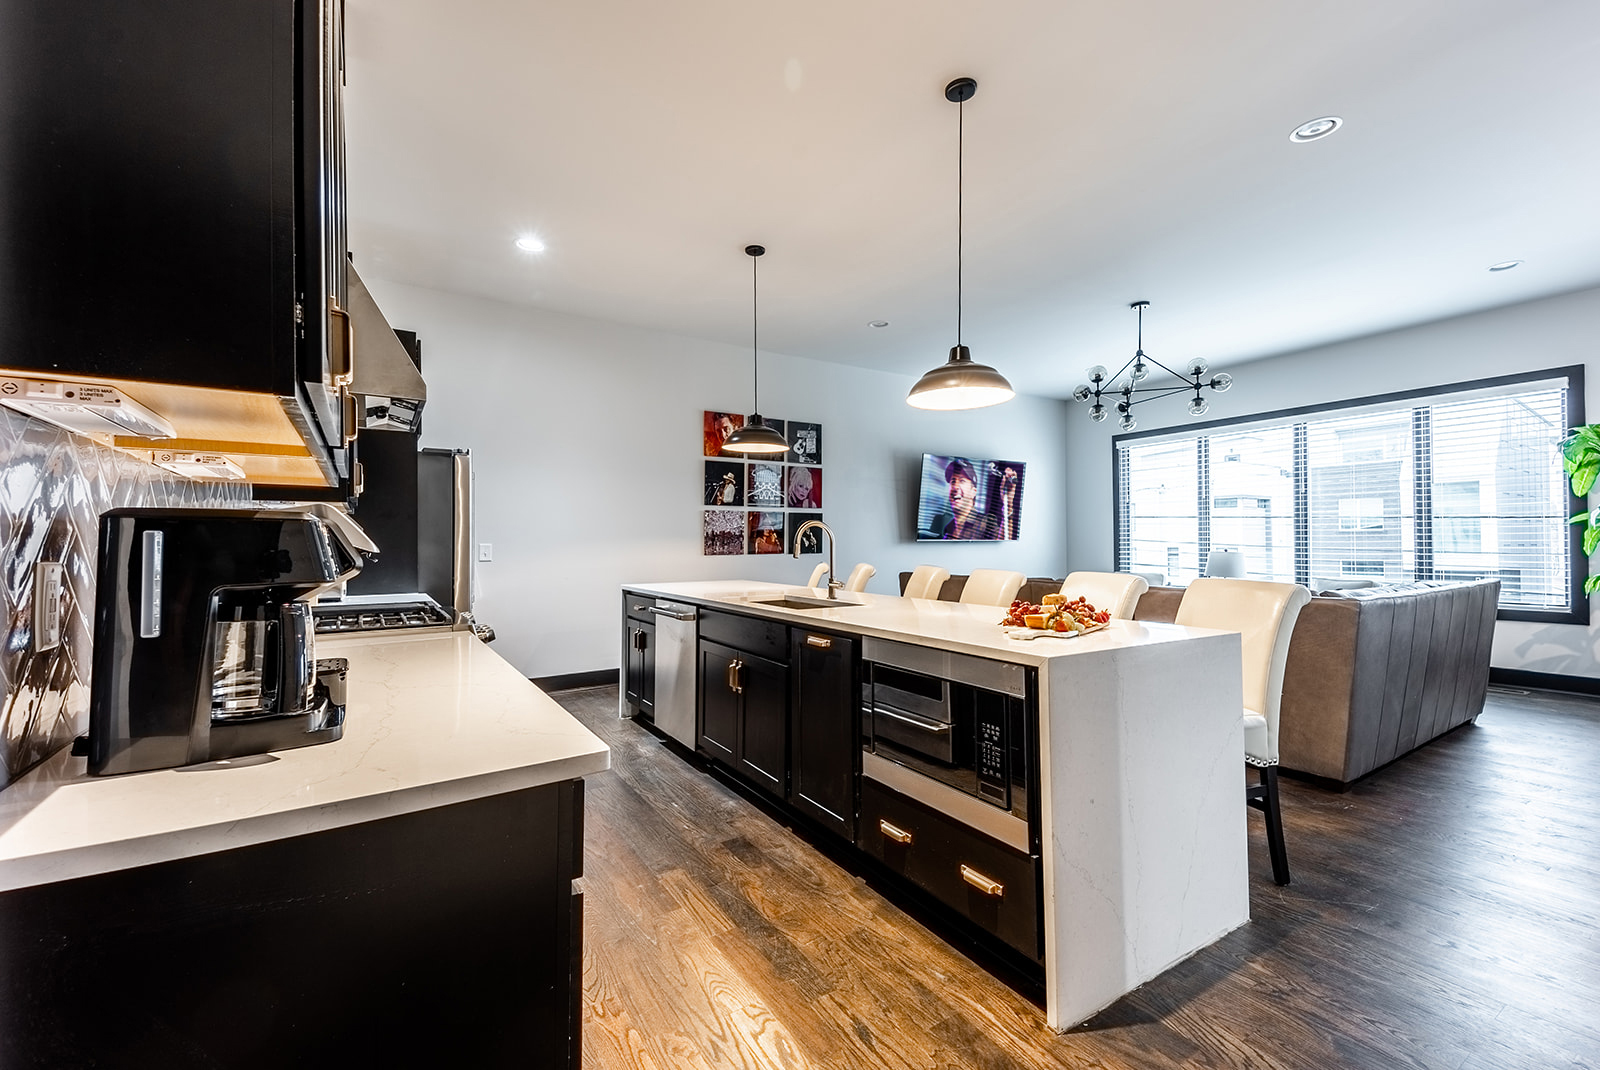 Unit 1: Fully equipped Kitchen with stainless steel appliances and breakfast bar seating.